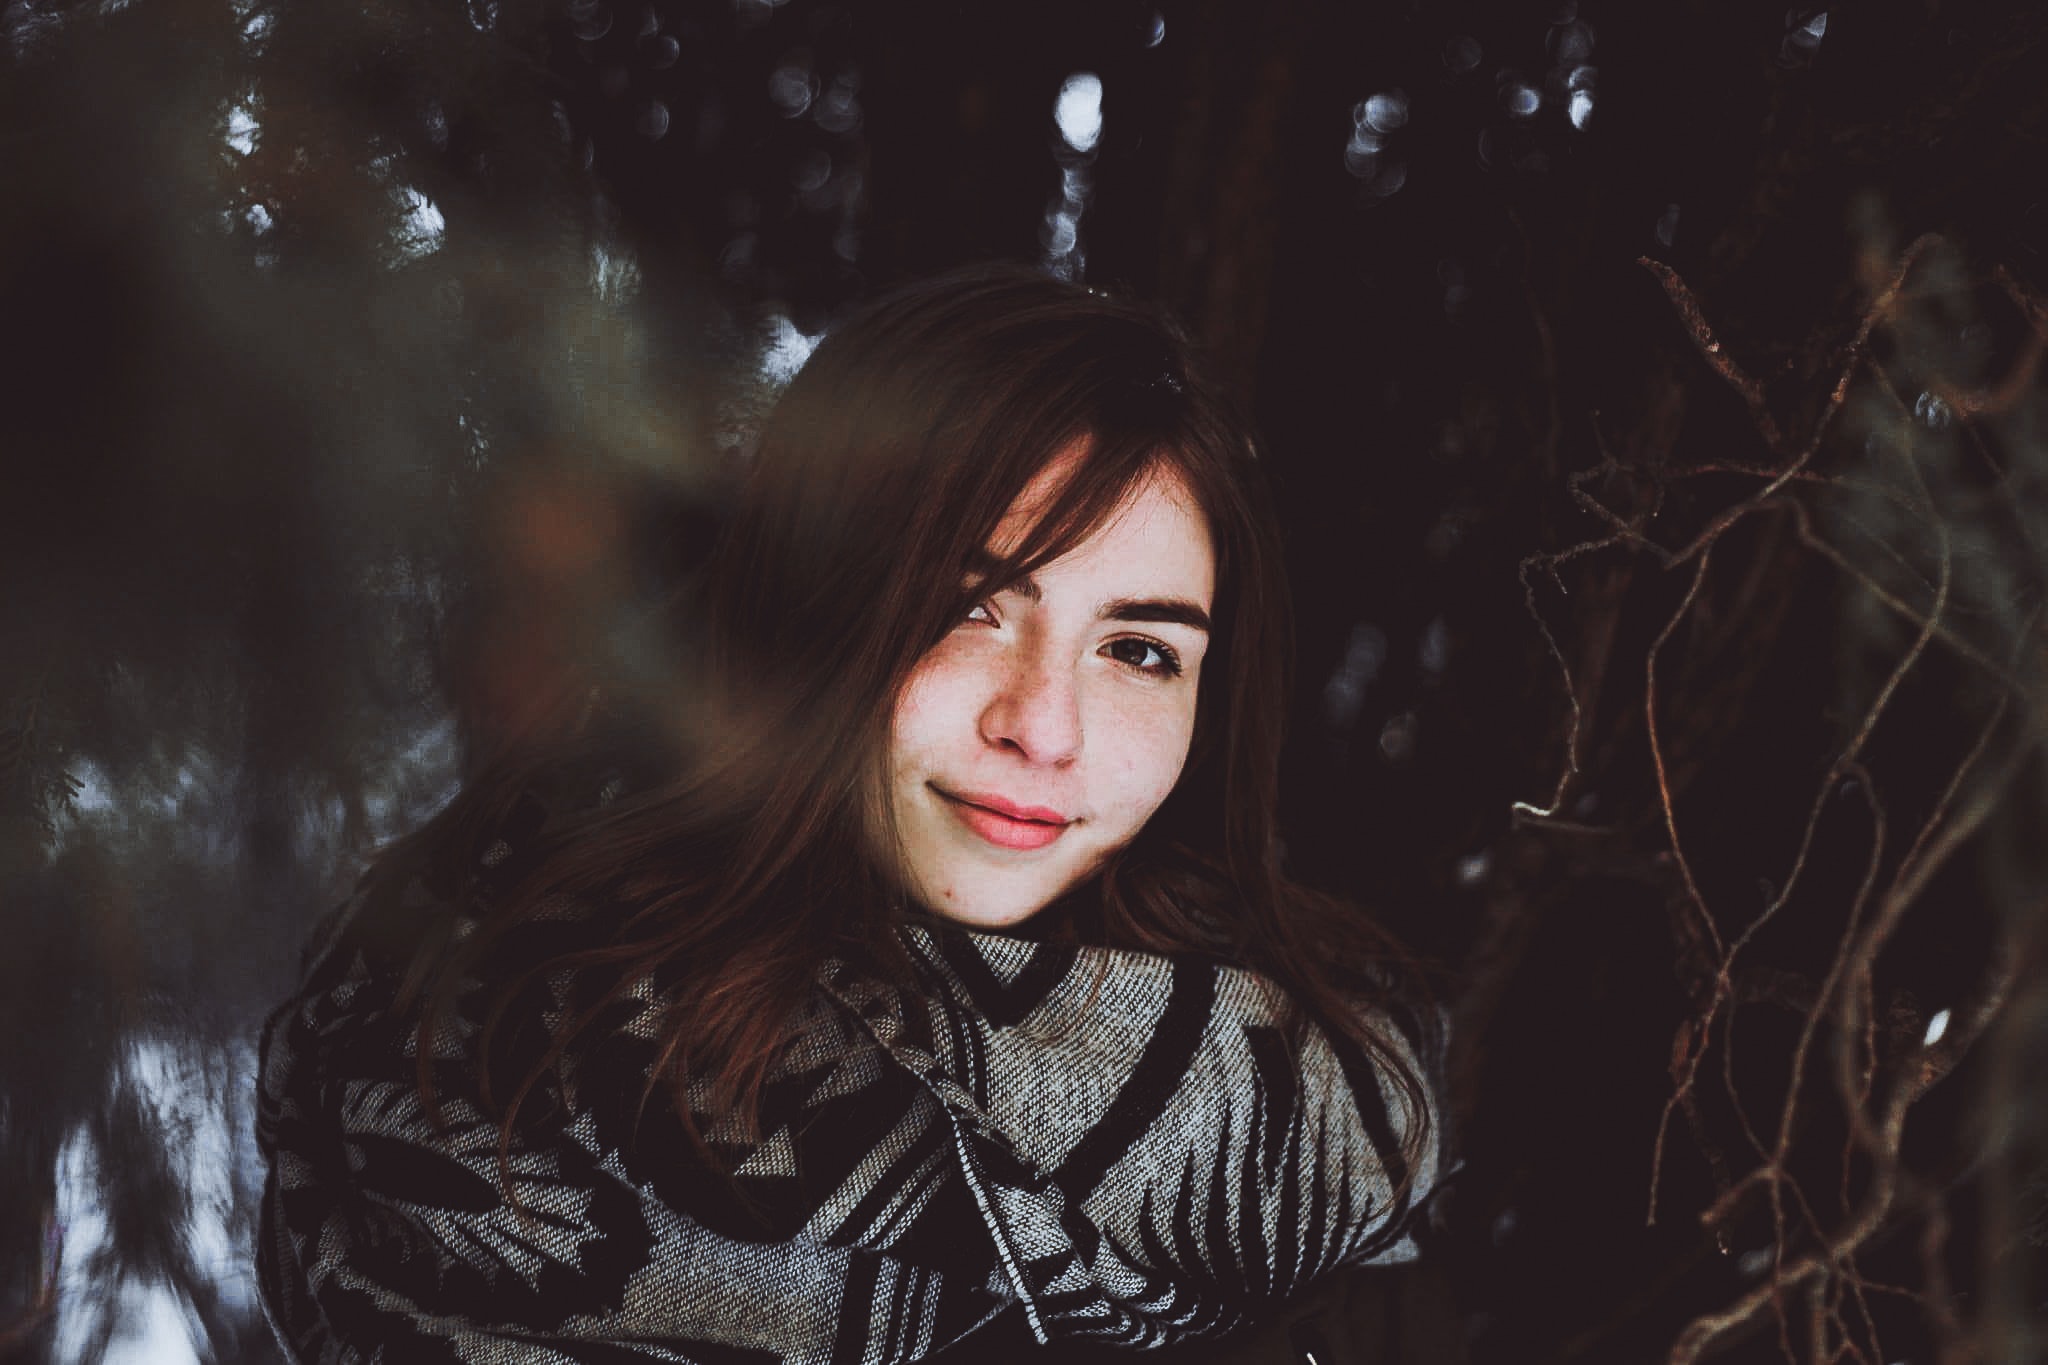 Woman in Black and Gray Sweater Posing Smile for Photo, Art, Woman, Winter, Wear, HQ Photo